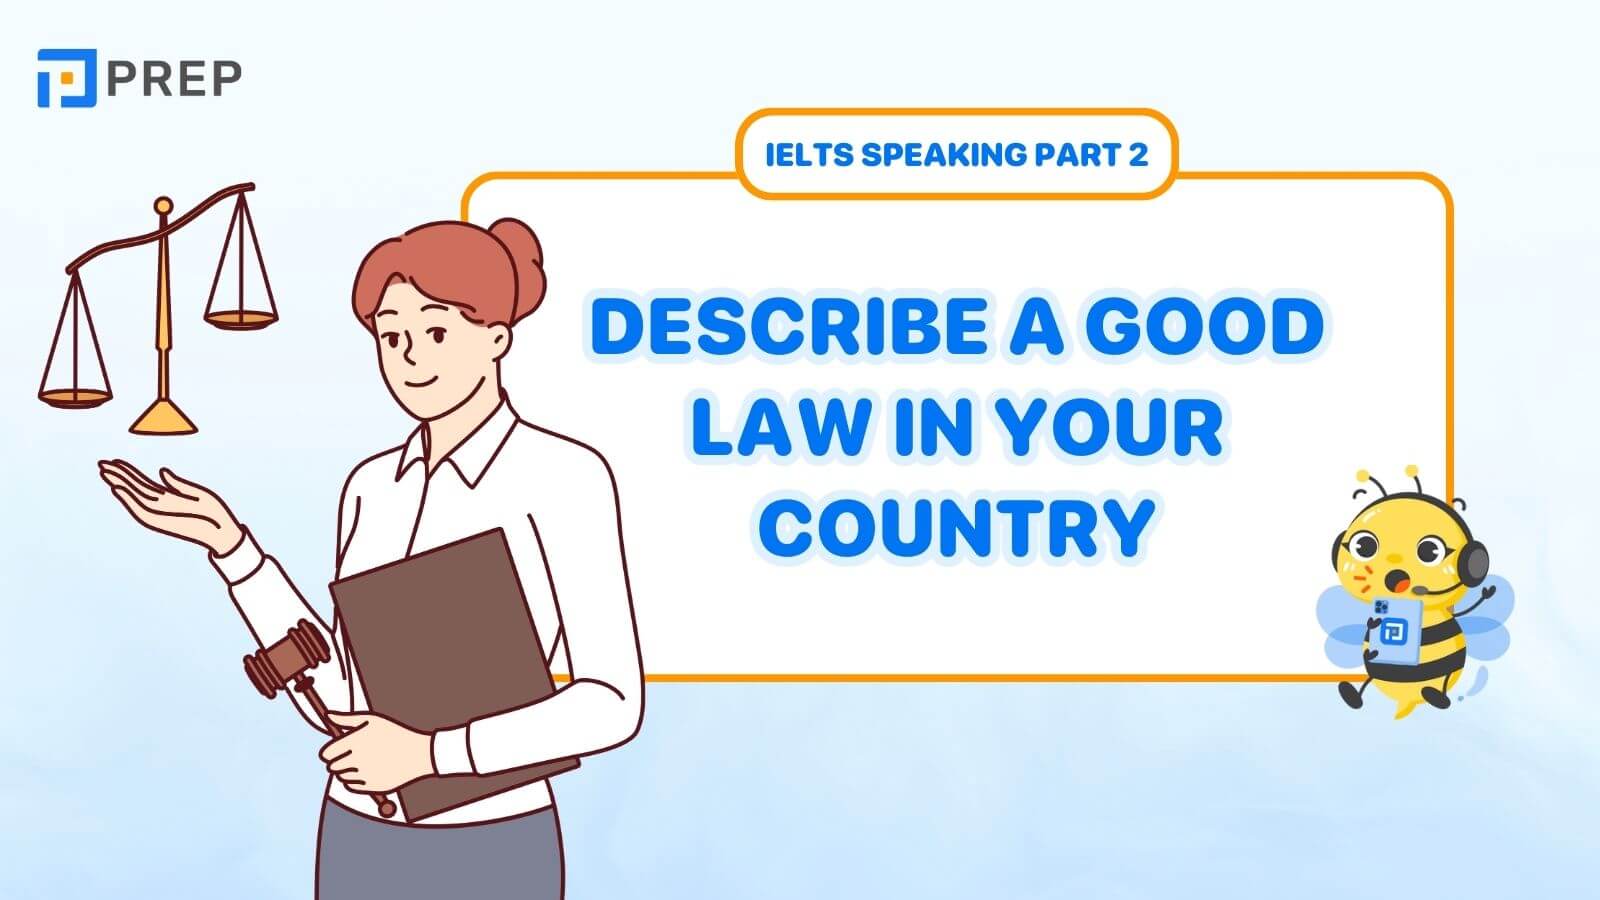 Describe a good law in your country